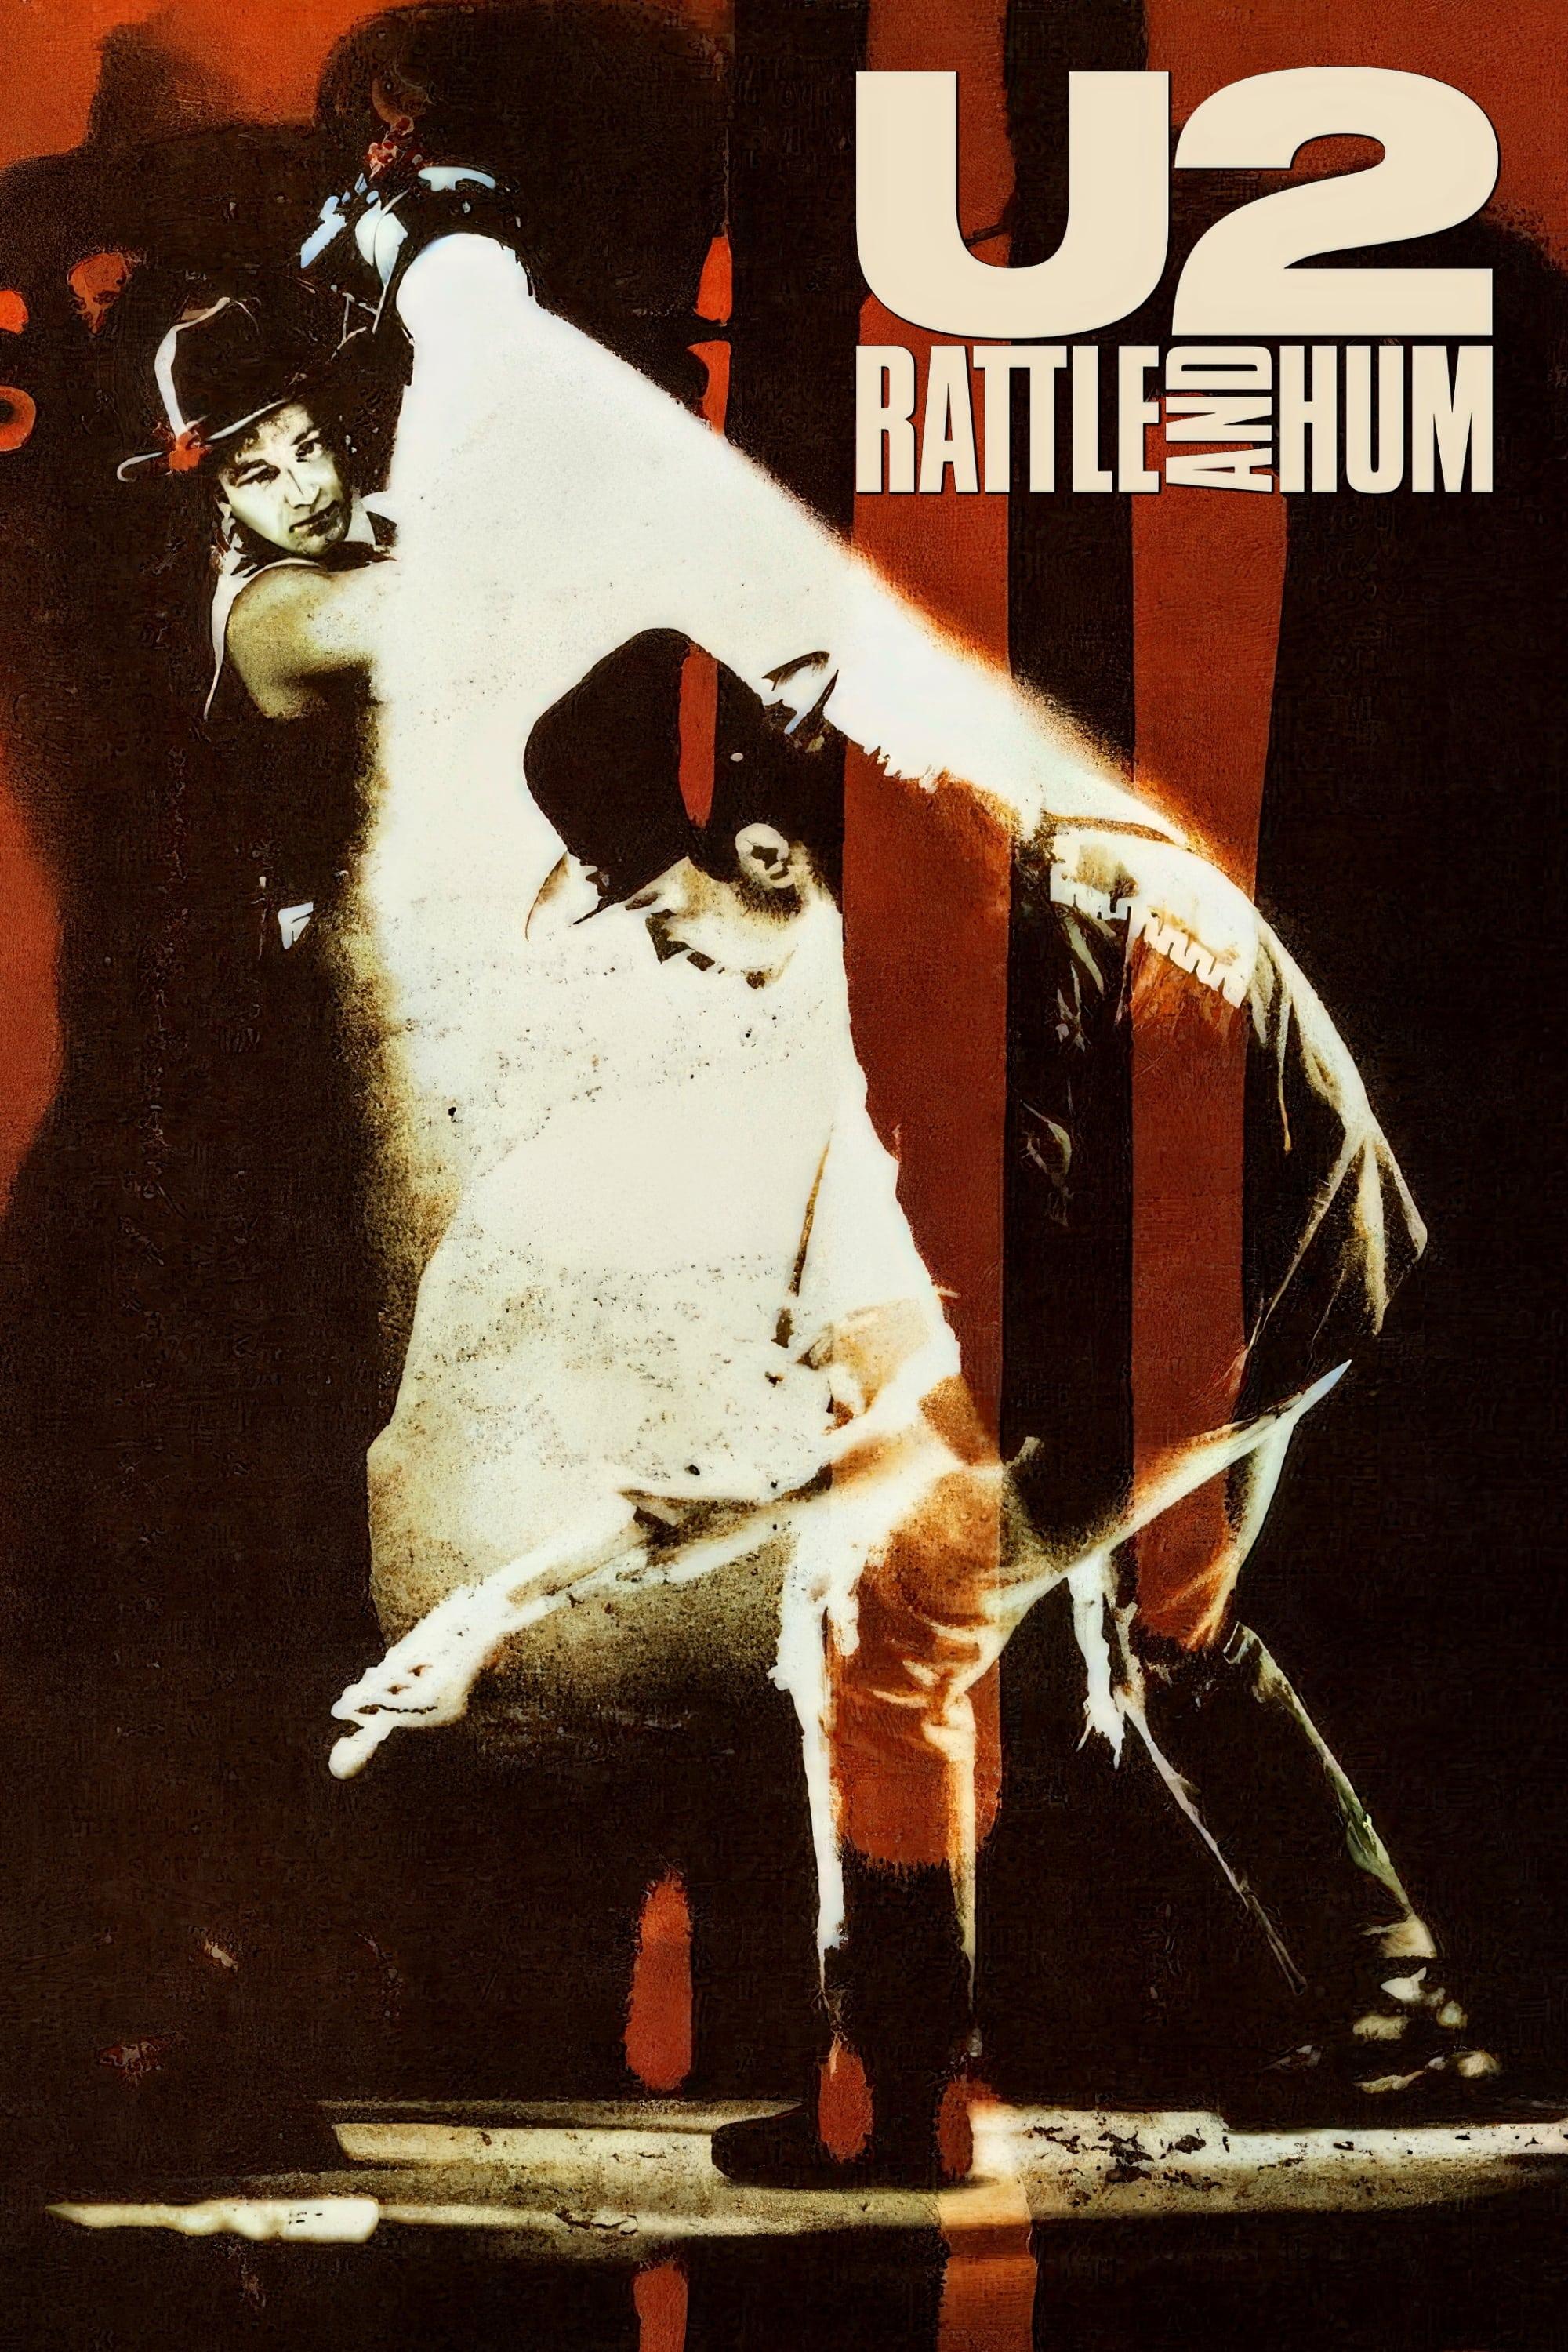 U2: Rattle and Hum poster